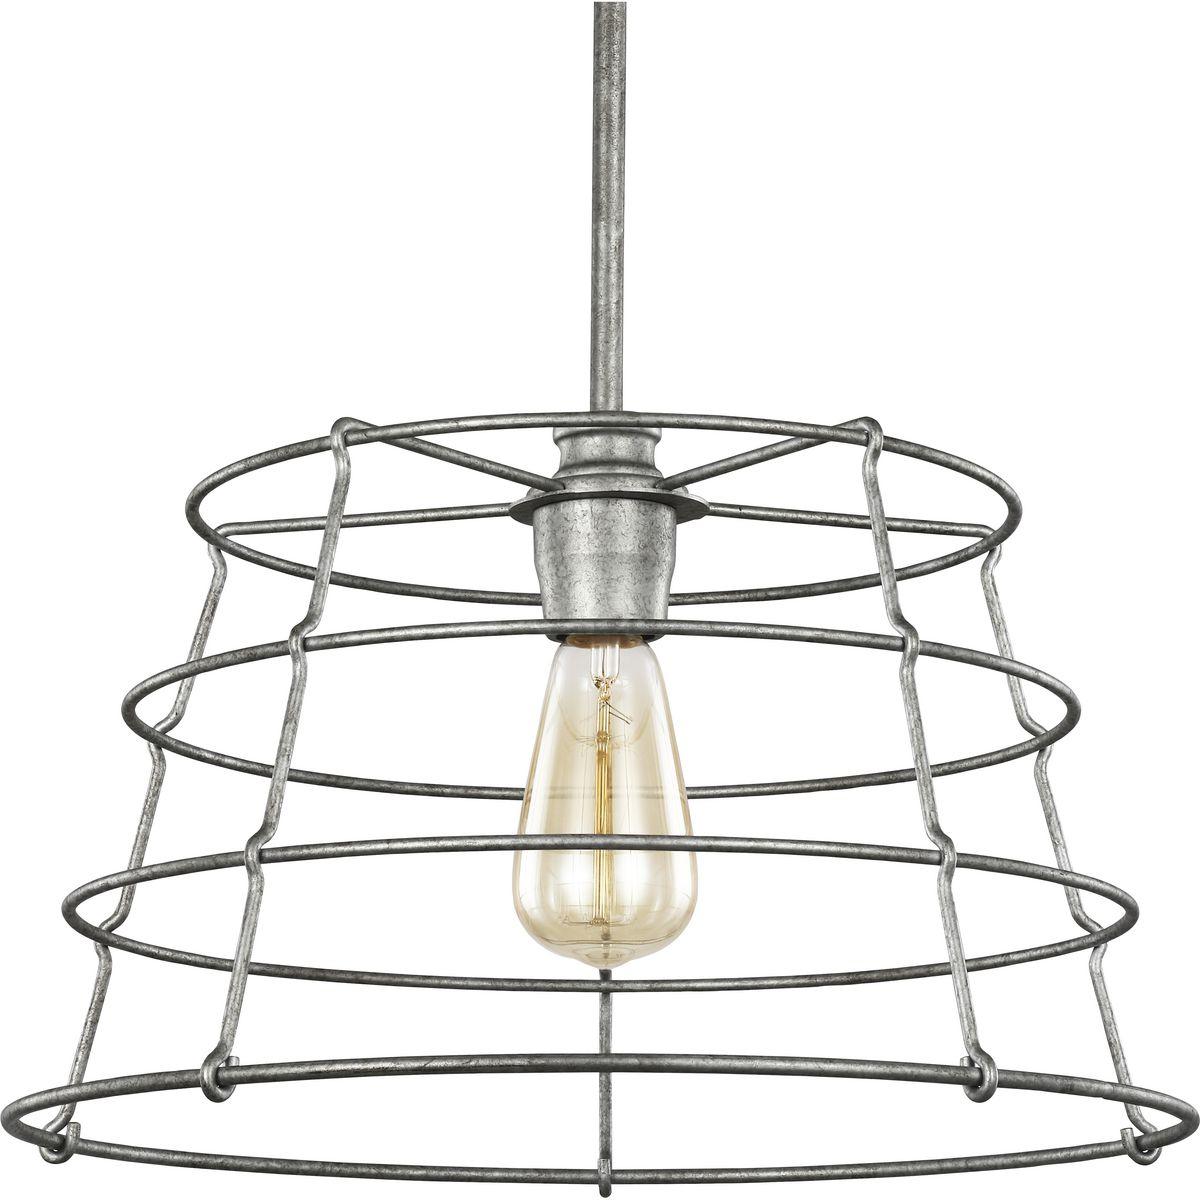 Hubbell P500282-141 Foster a down-home décor theme with this rustic pendant. A simple egg-basket-inspired wire-frame shade grants the light fixture its signature country-look. Inside the open-cage shade is a vintage light bulb coated in a farmhouse-style galvanized finish.  